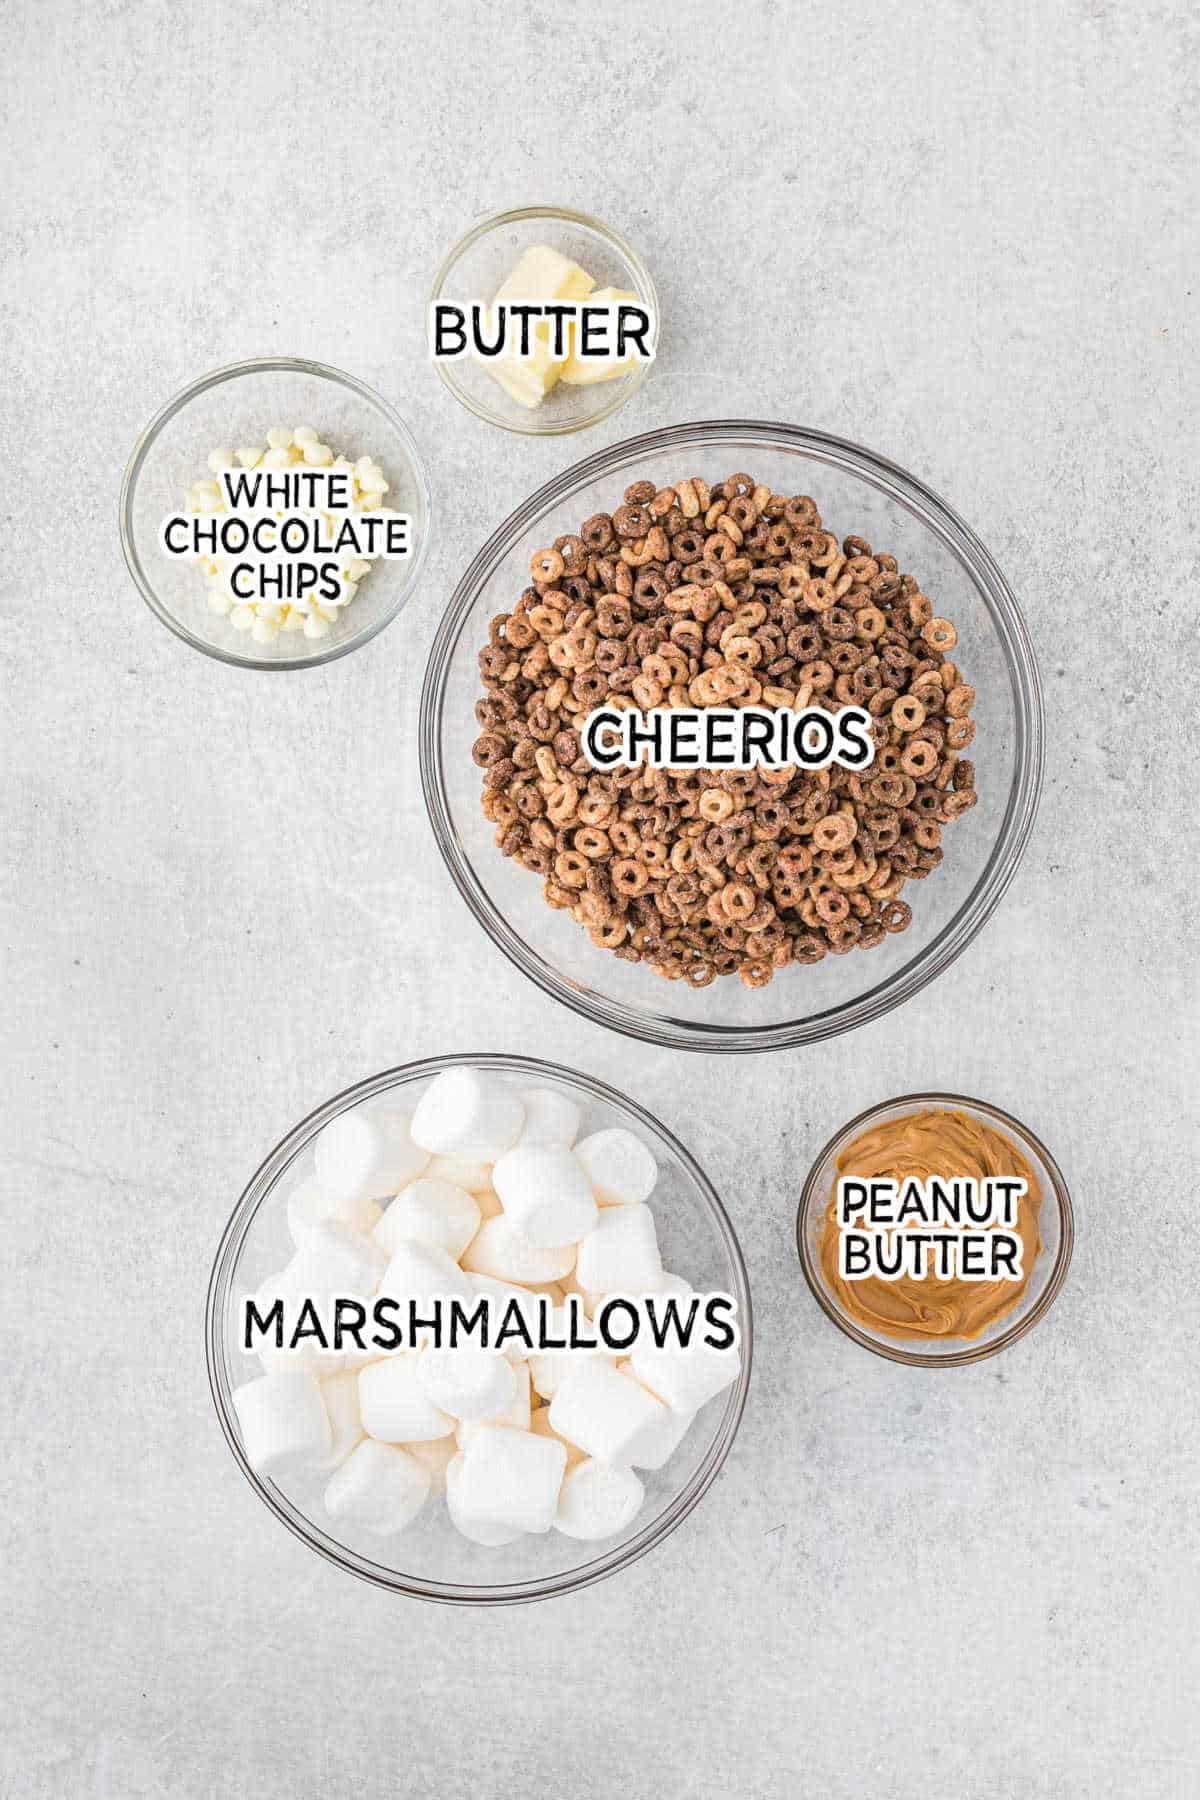 Ingredients to make white chocolate peanut butter cheerios treats.